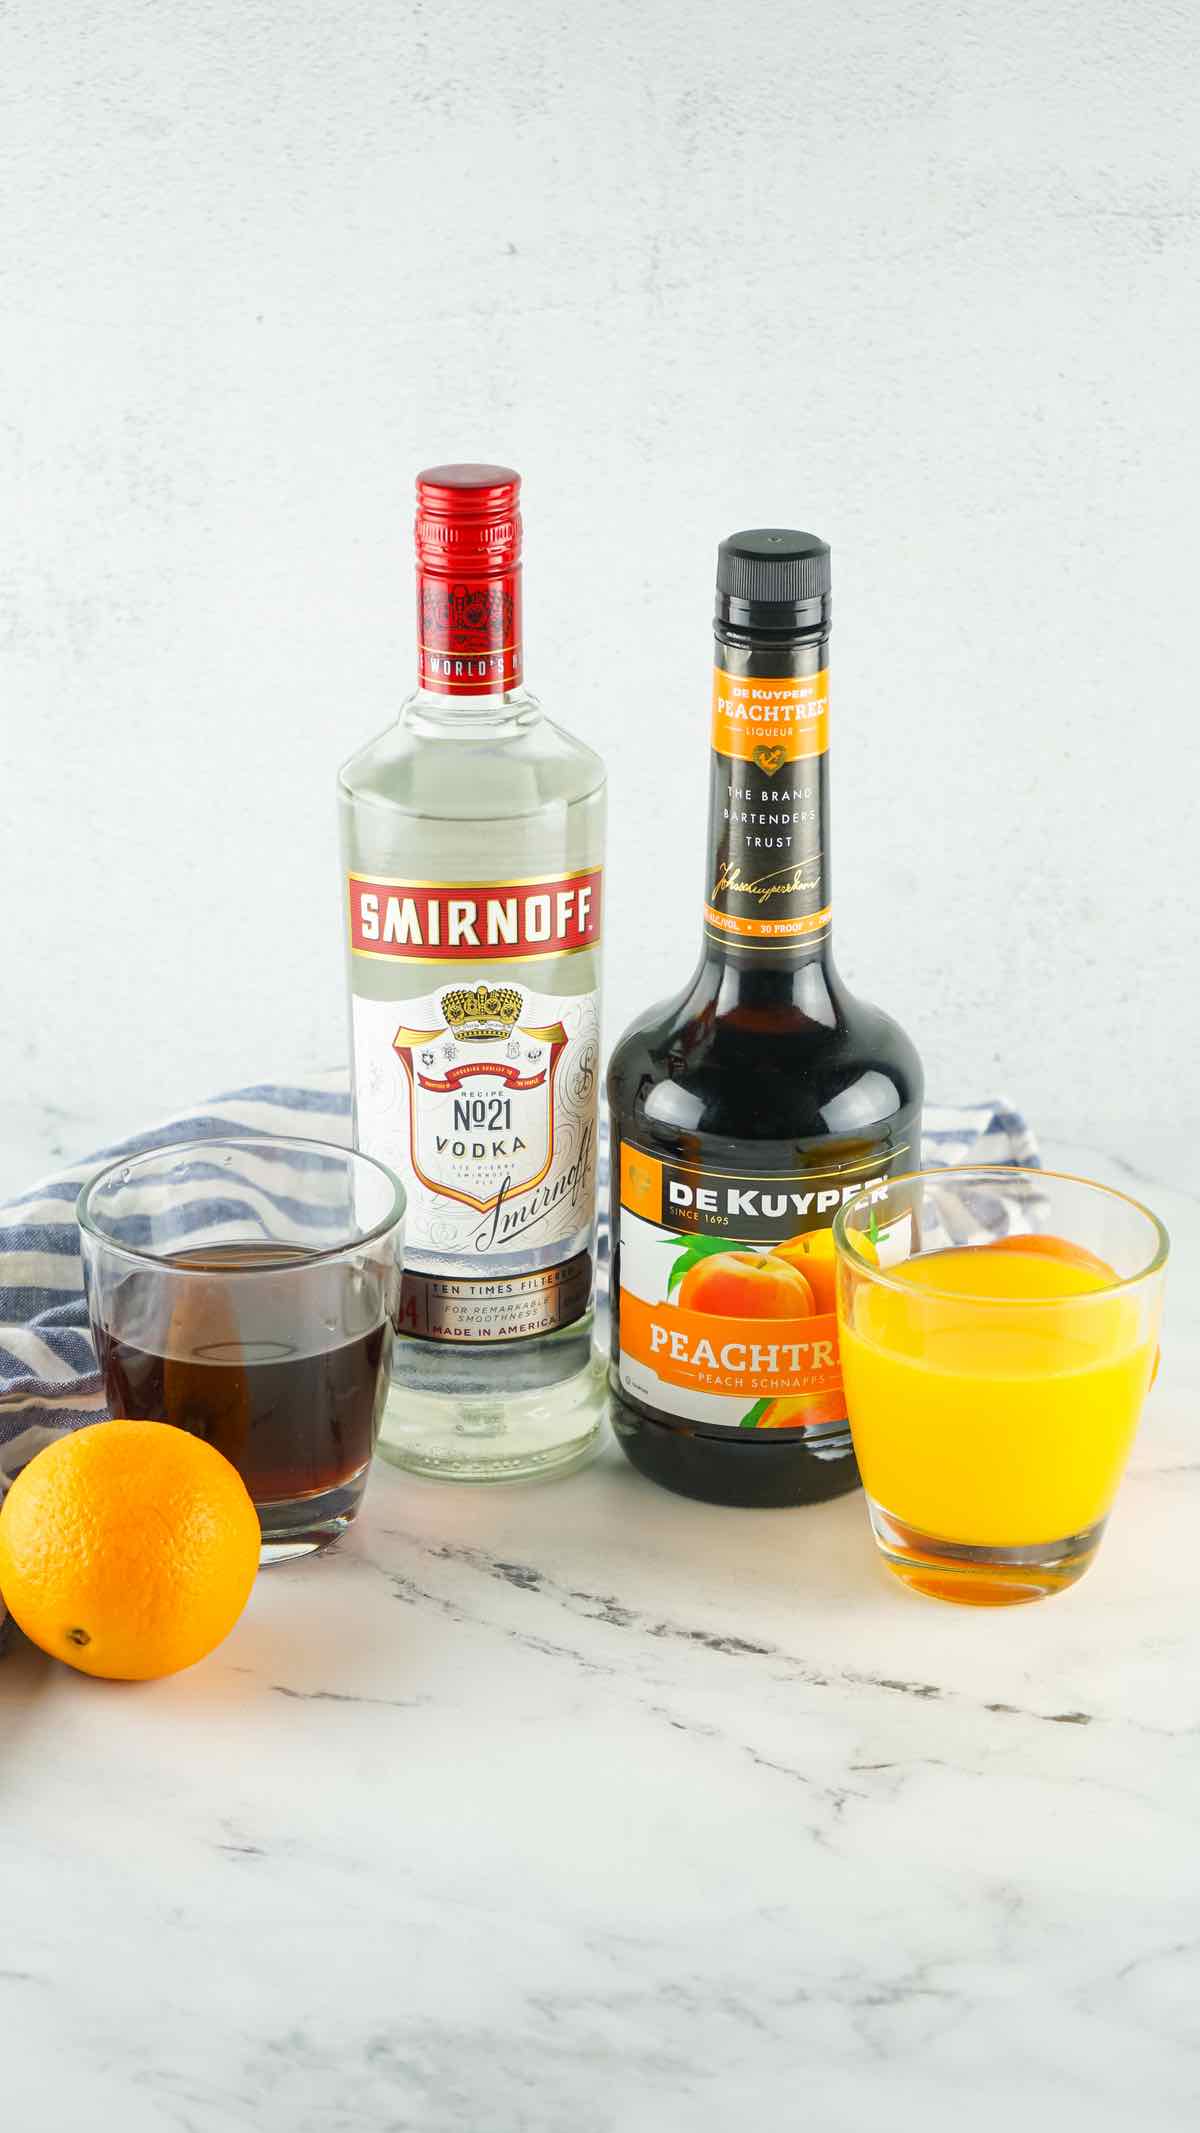 The ingredients needed to make this drink are vodka, peach schnapps, orange juice and cranberry juice.